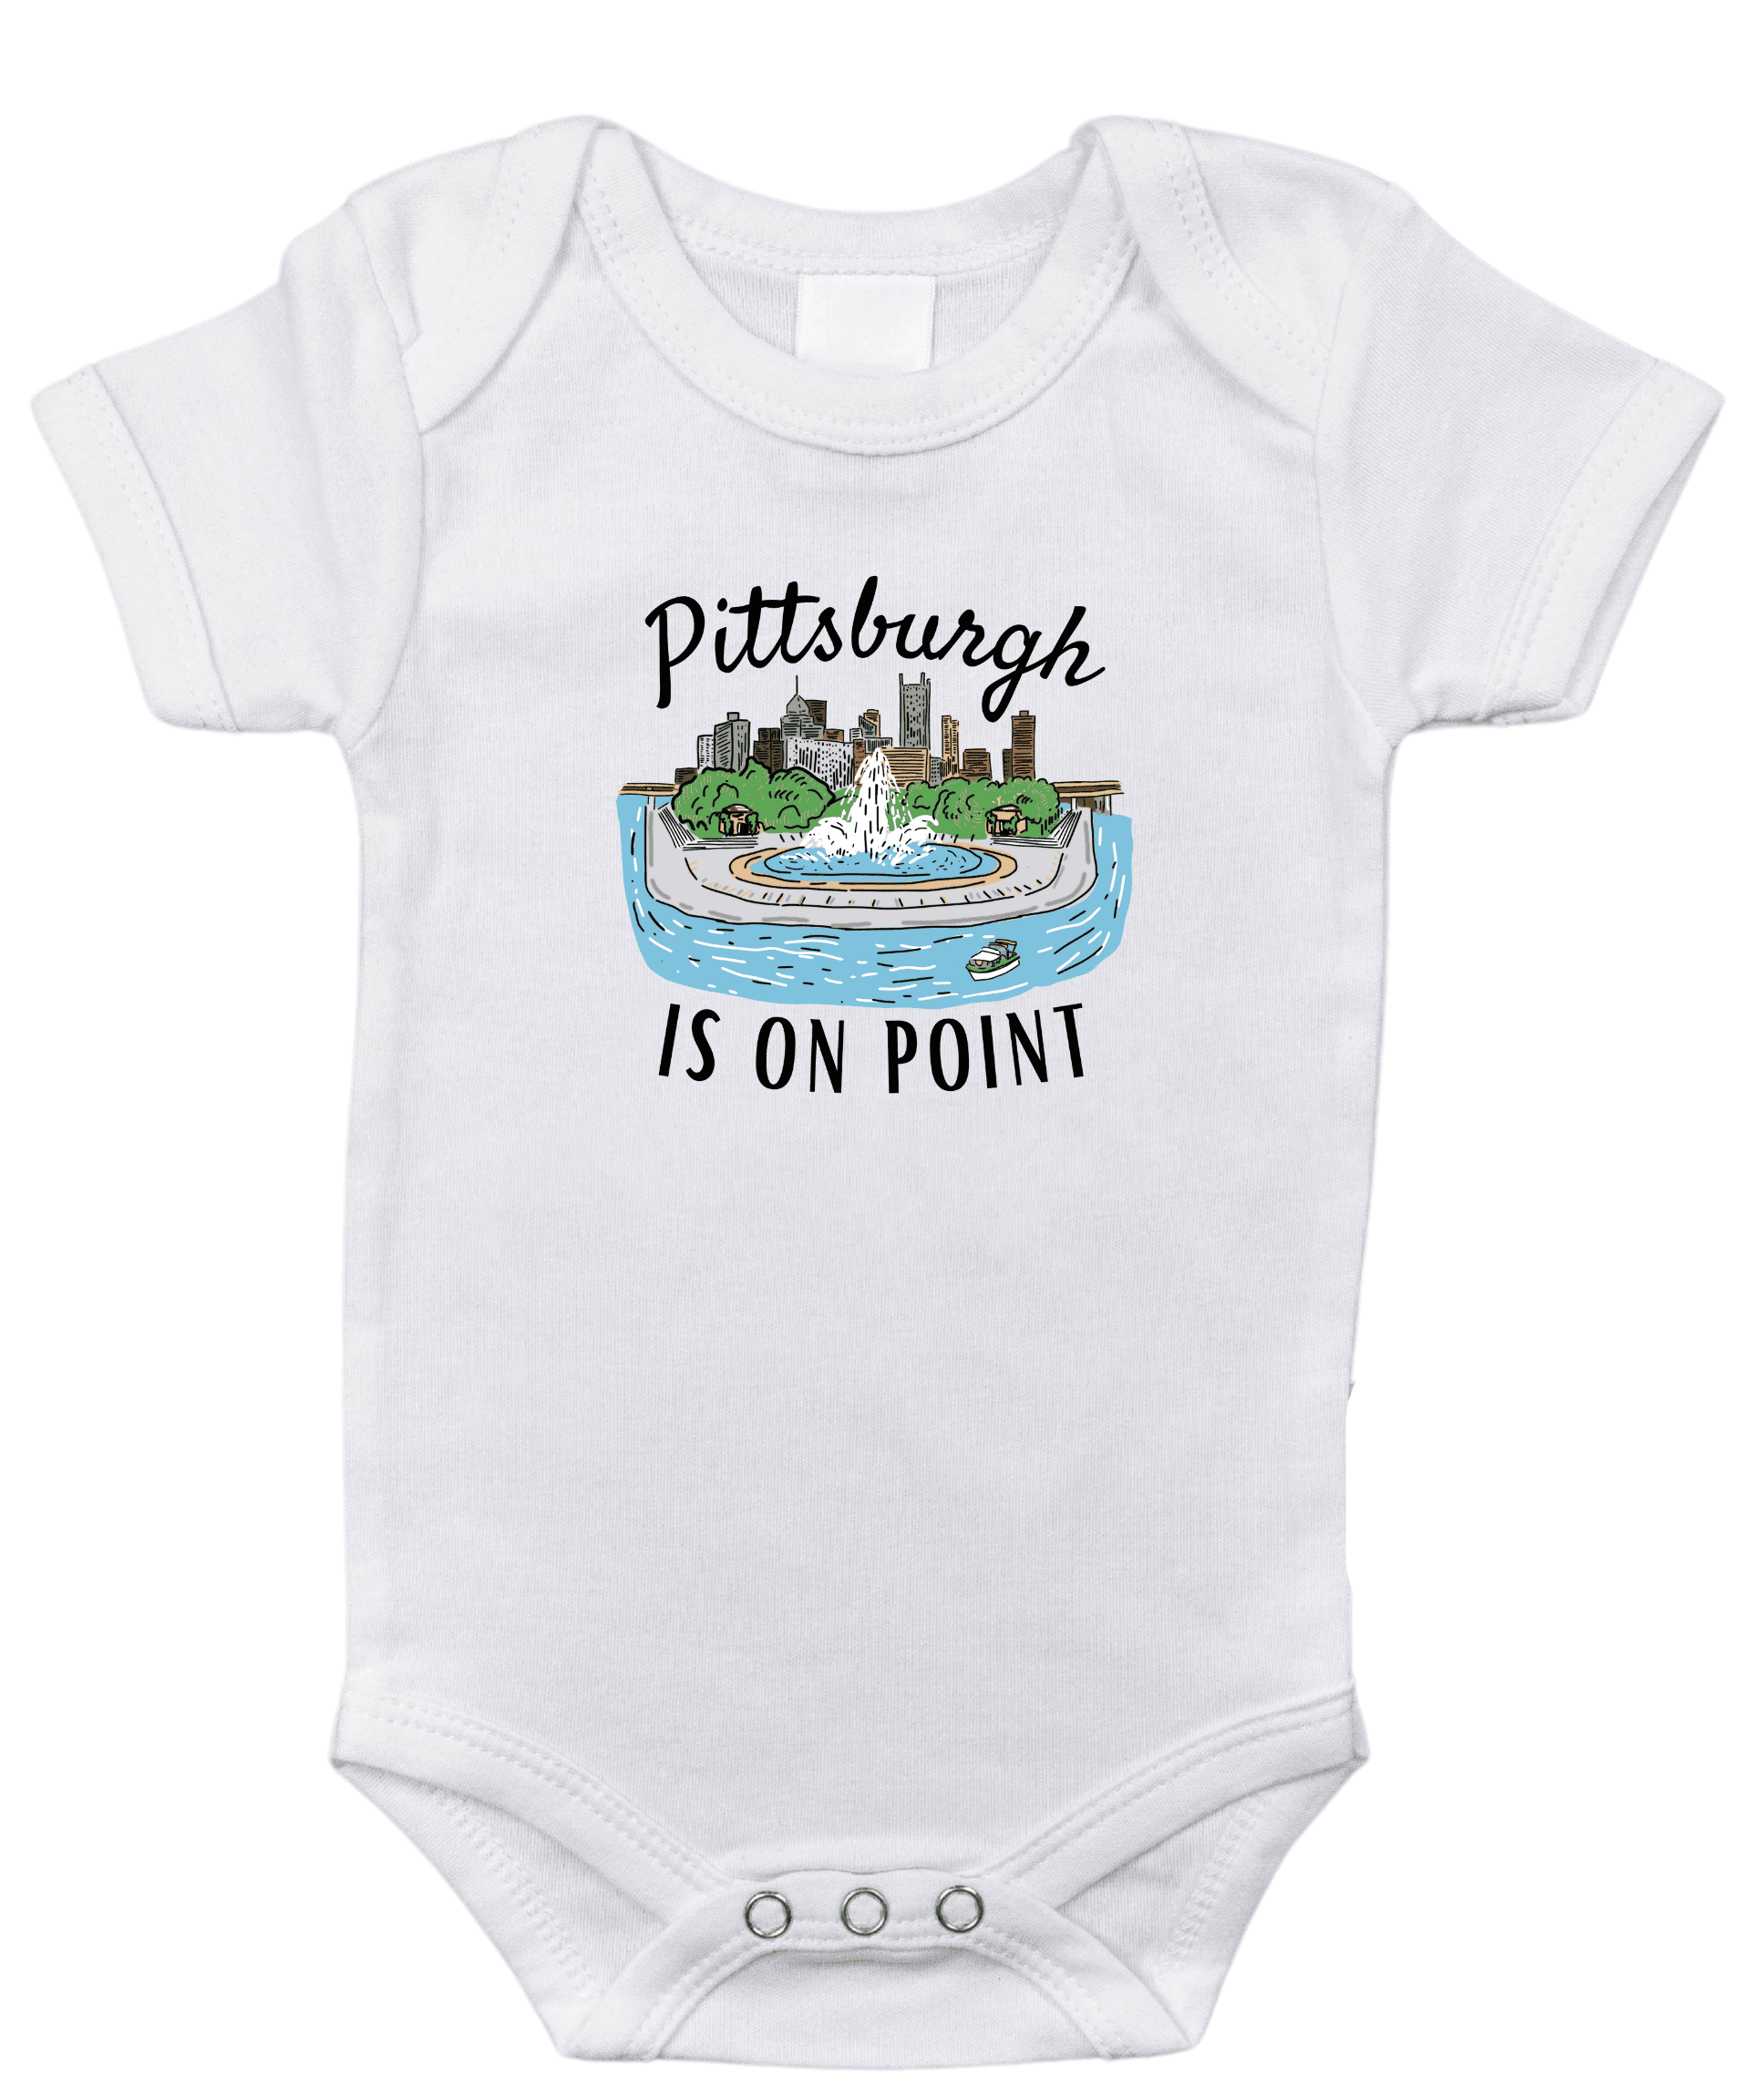 White baby onesie with "Pittsburgh is on point" in black text, featuring a yellow and black Pittsburgh skyline.